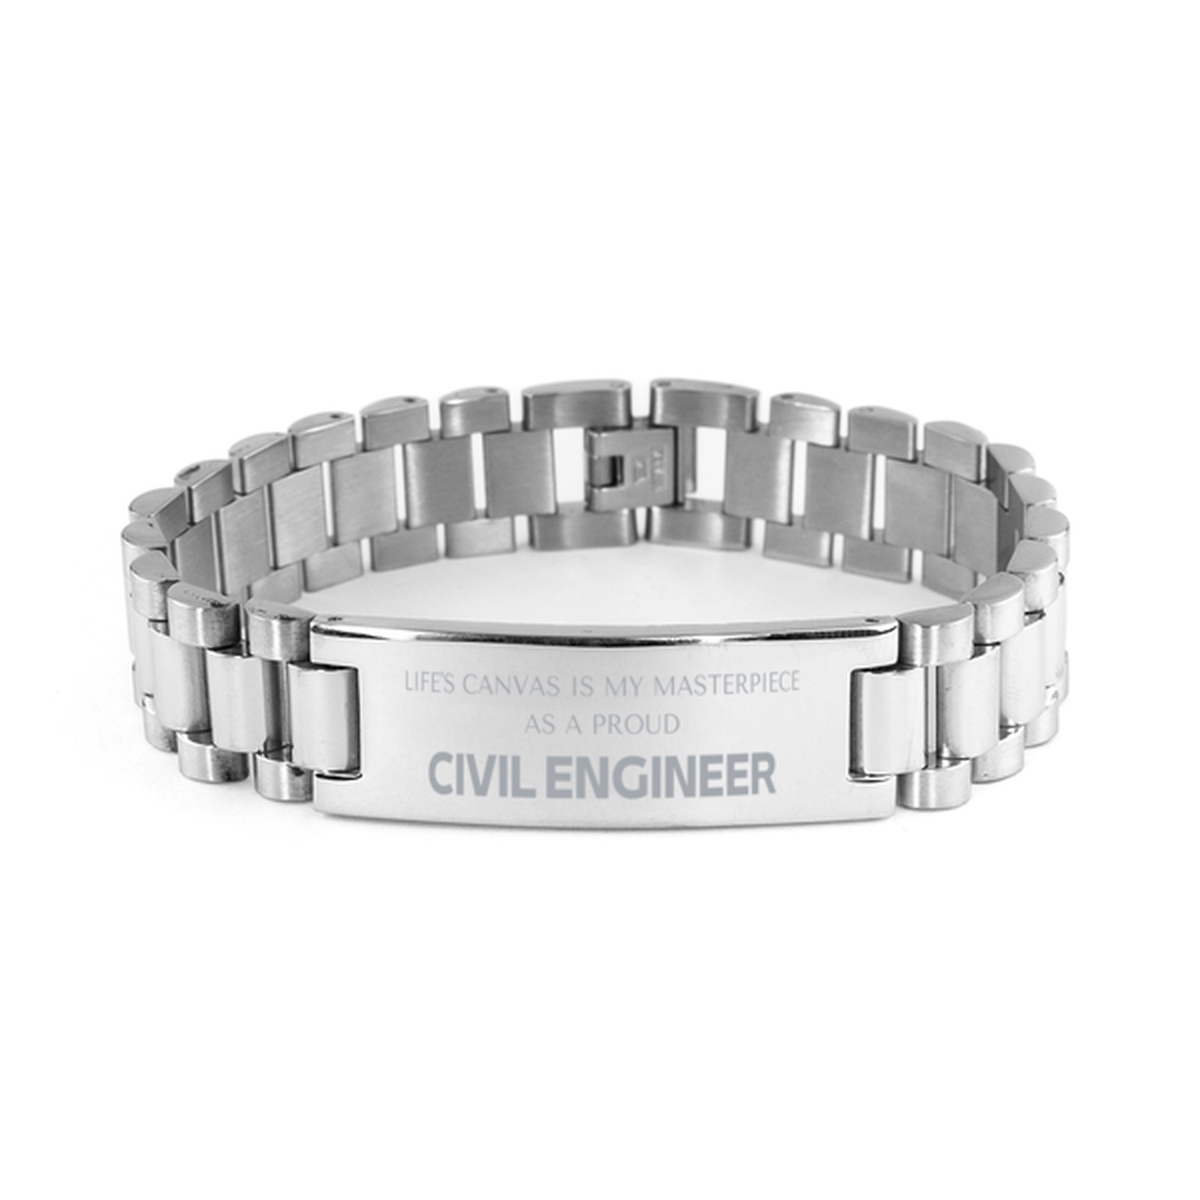 Proud Civil Engineer Gifts, Life's canvas is my masterpiece, Epic Birthday Christmas Unique Ladder Stainless Steel Bracelet For Civil Engineer, Coworkers, Men, Women, Friends